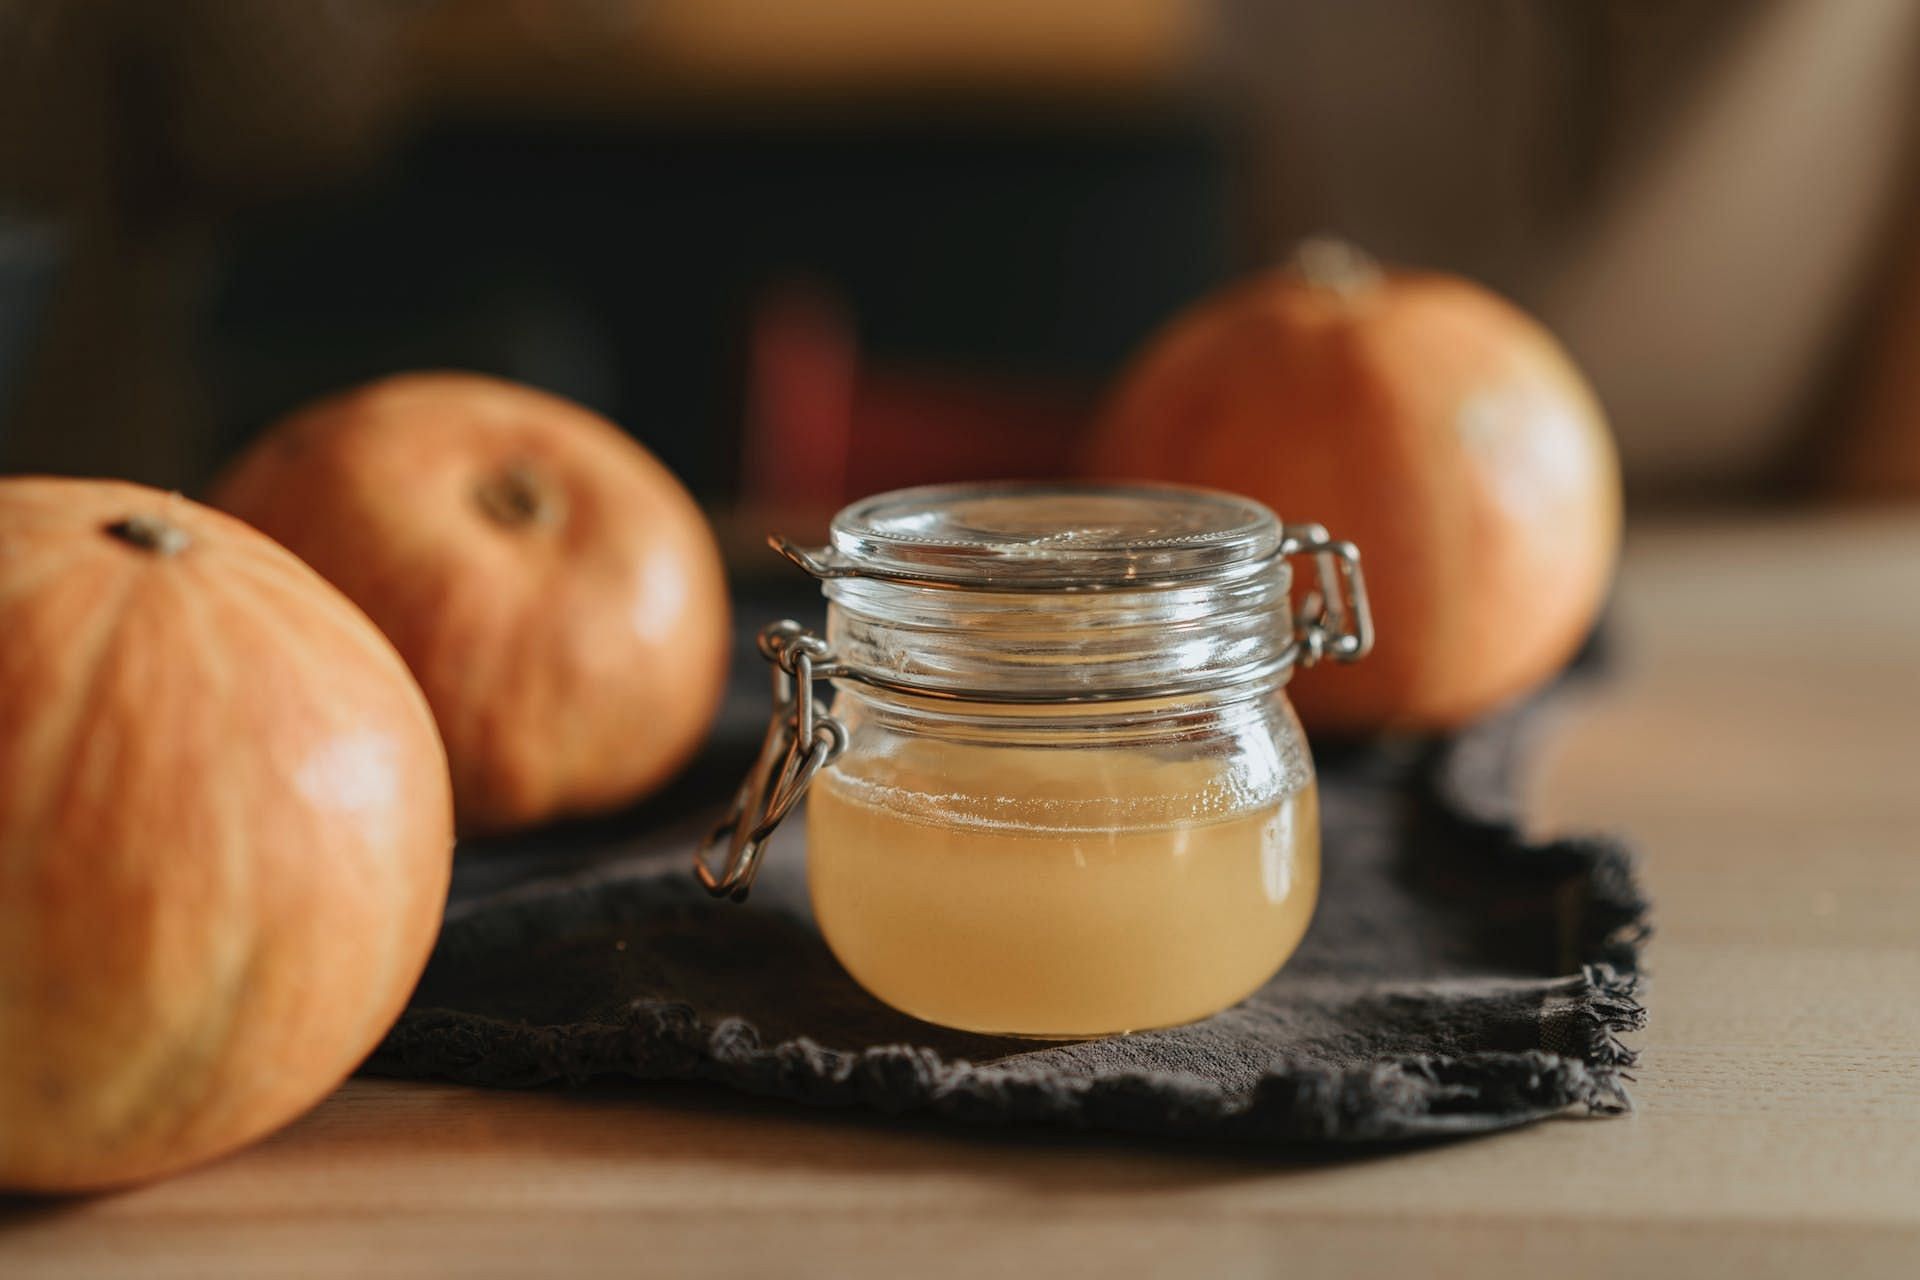 Apple cider mixed with vinegar is one of the best drinks to boost the immune system. (Image via Pexels/olia danilevich)